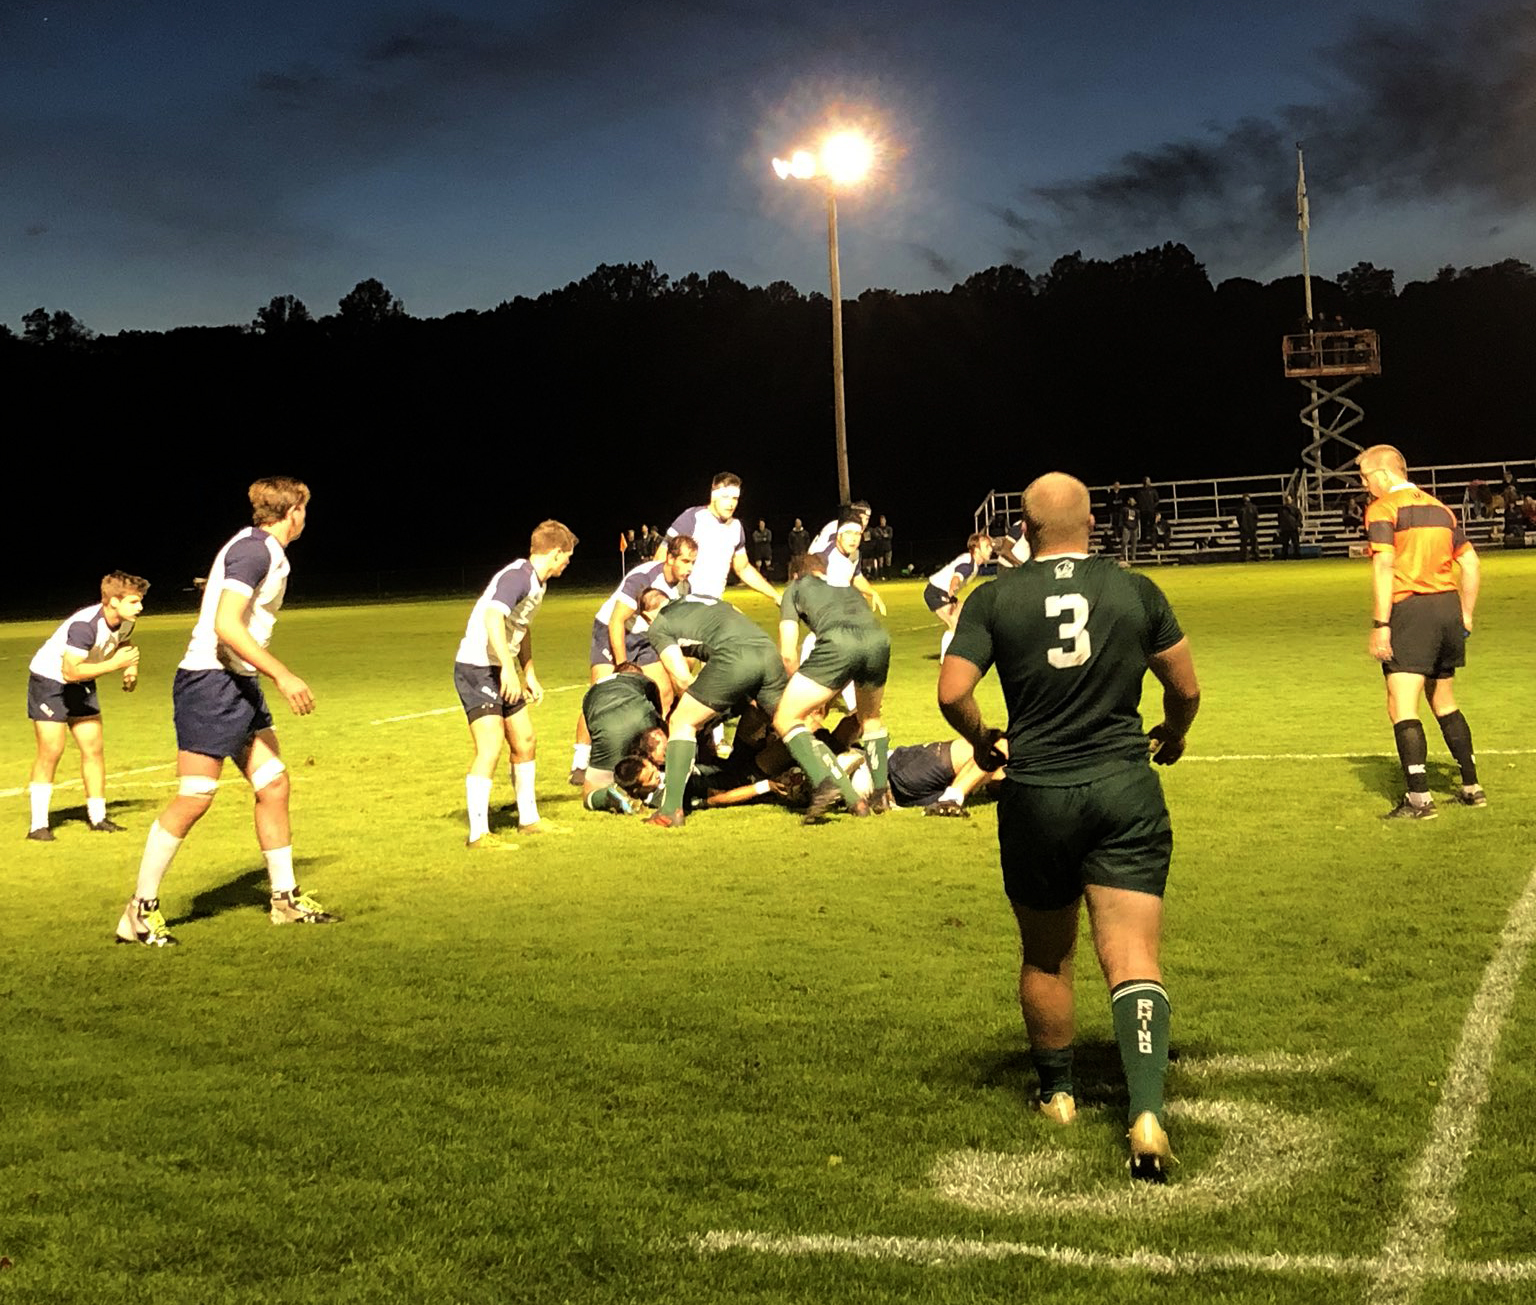 Dartmouth Rugby traveld to Yale for a Friday night contest